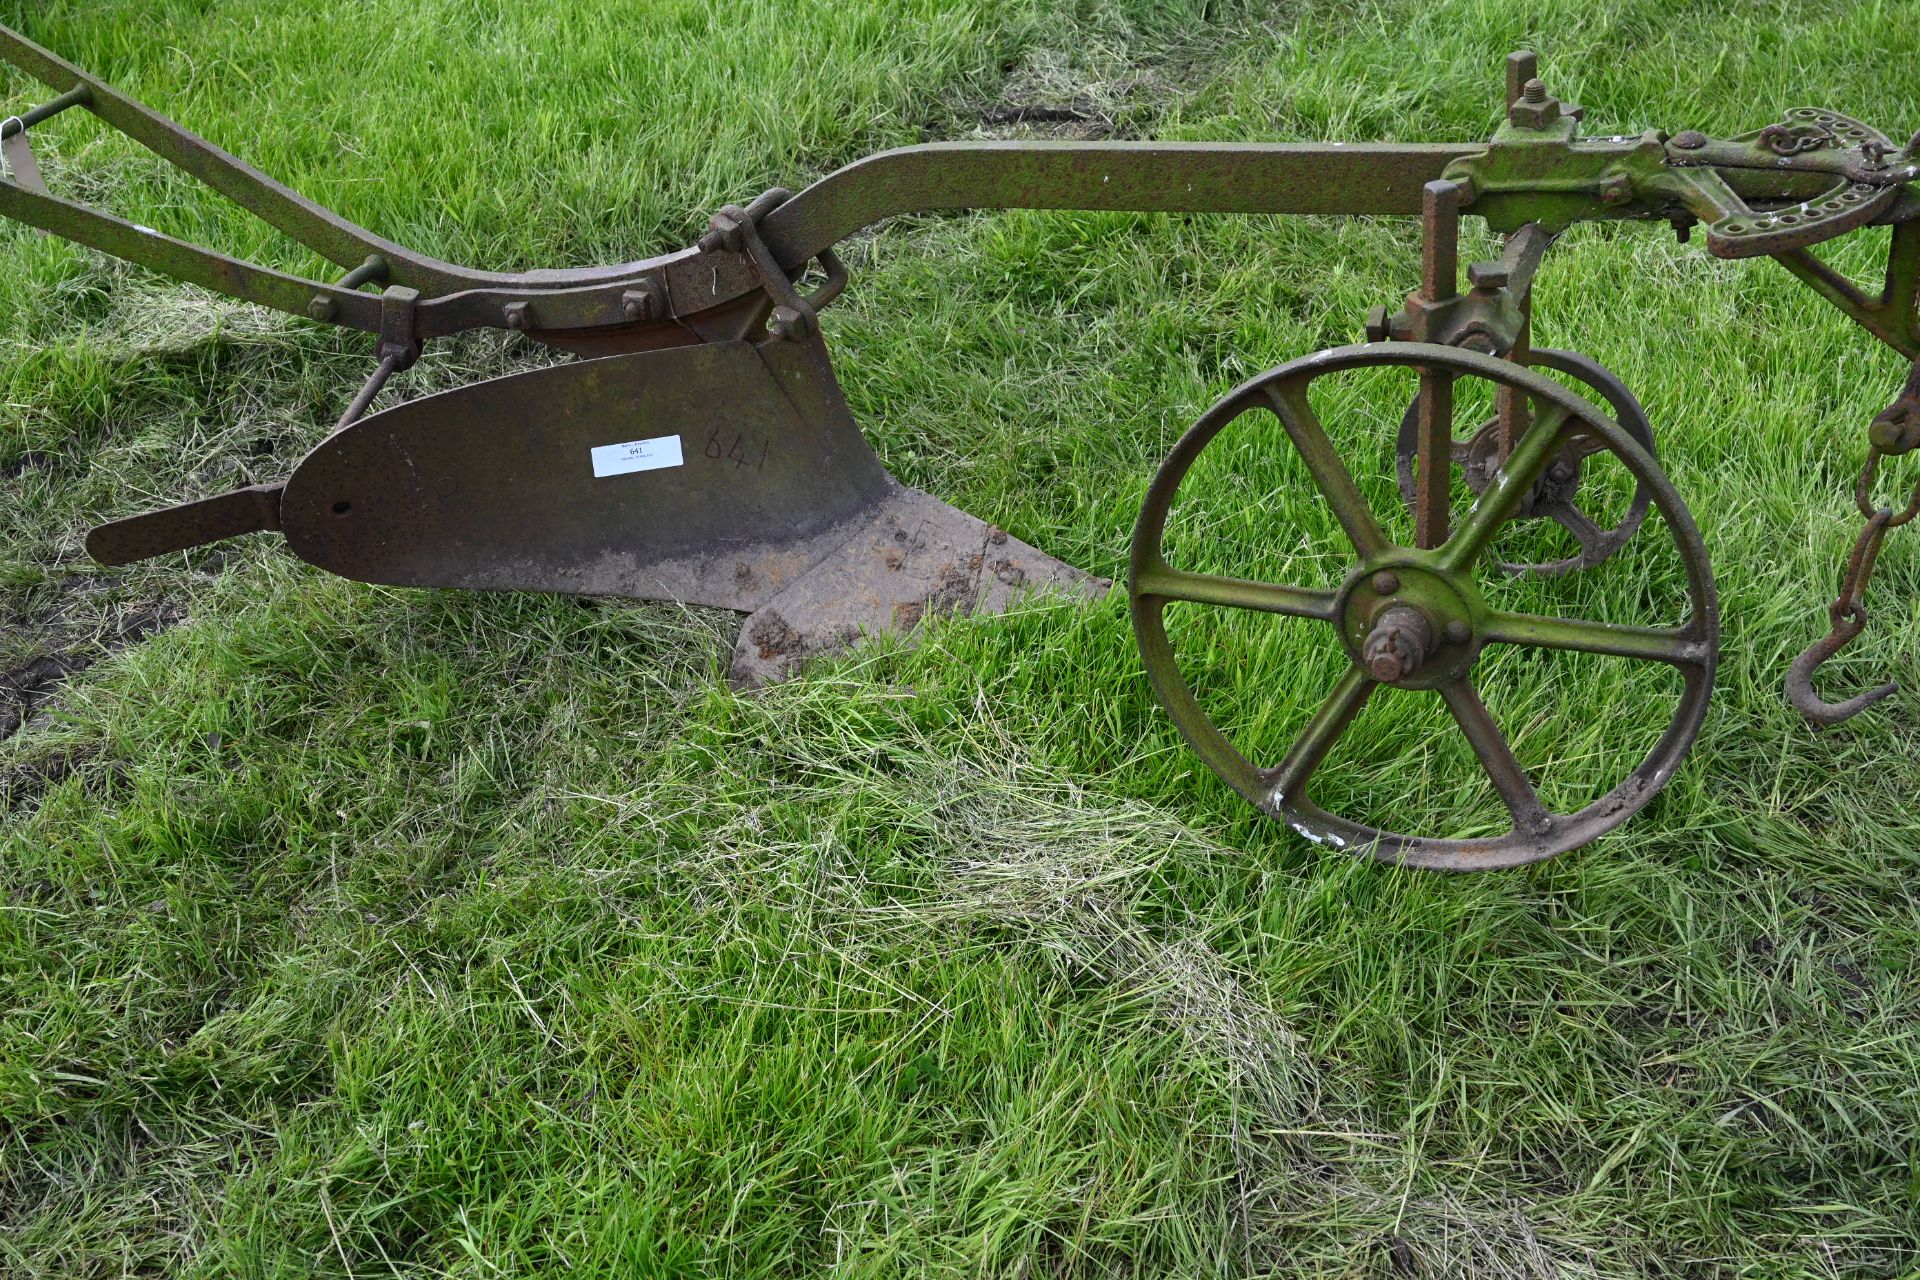 One single furrow horse drawn plough with wheels and guide handles